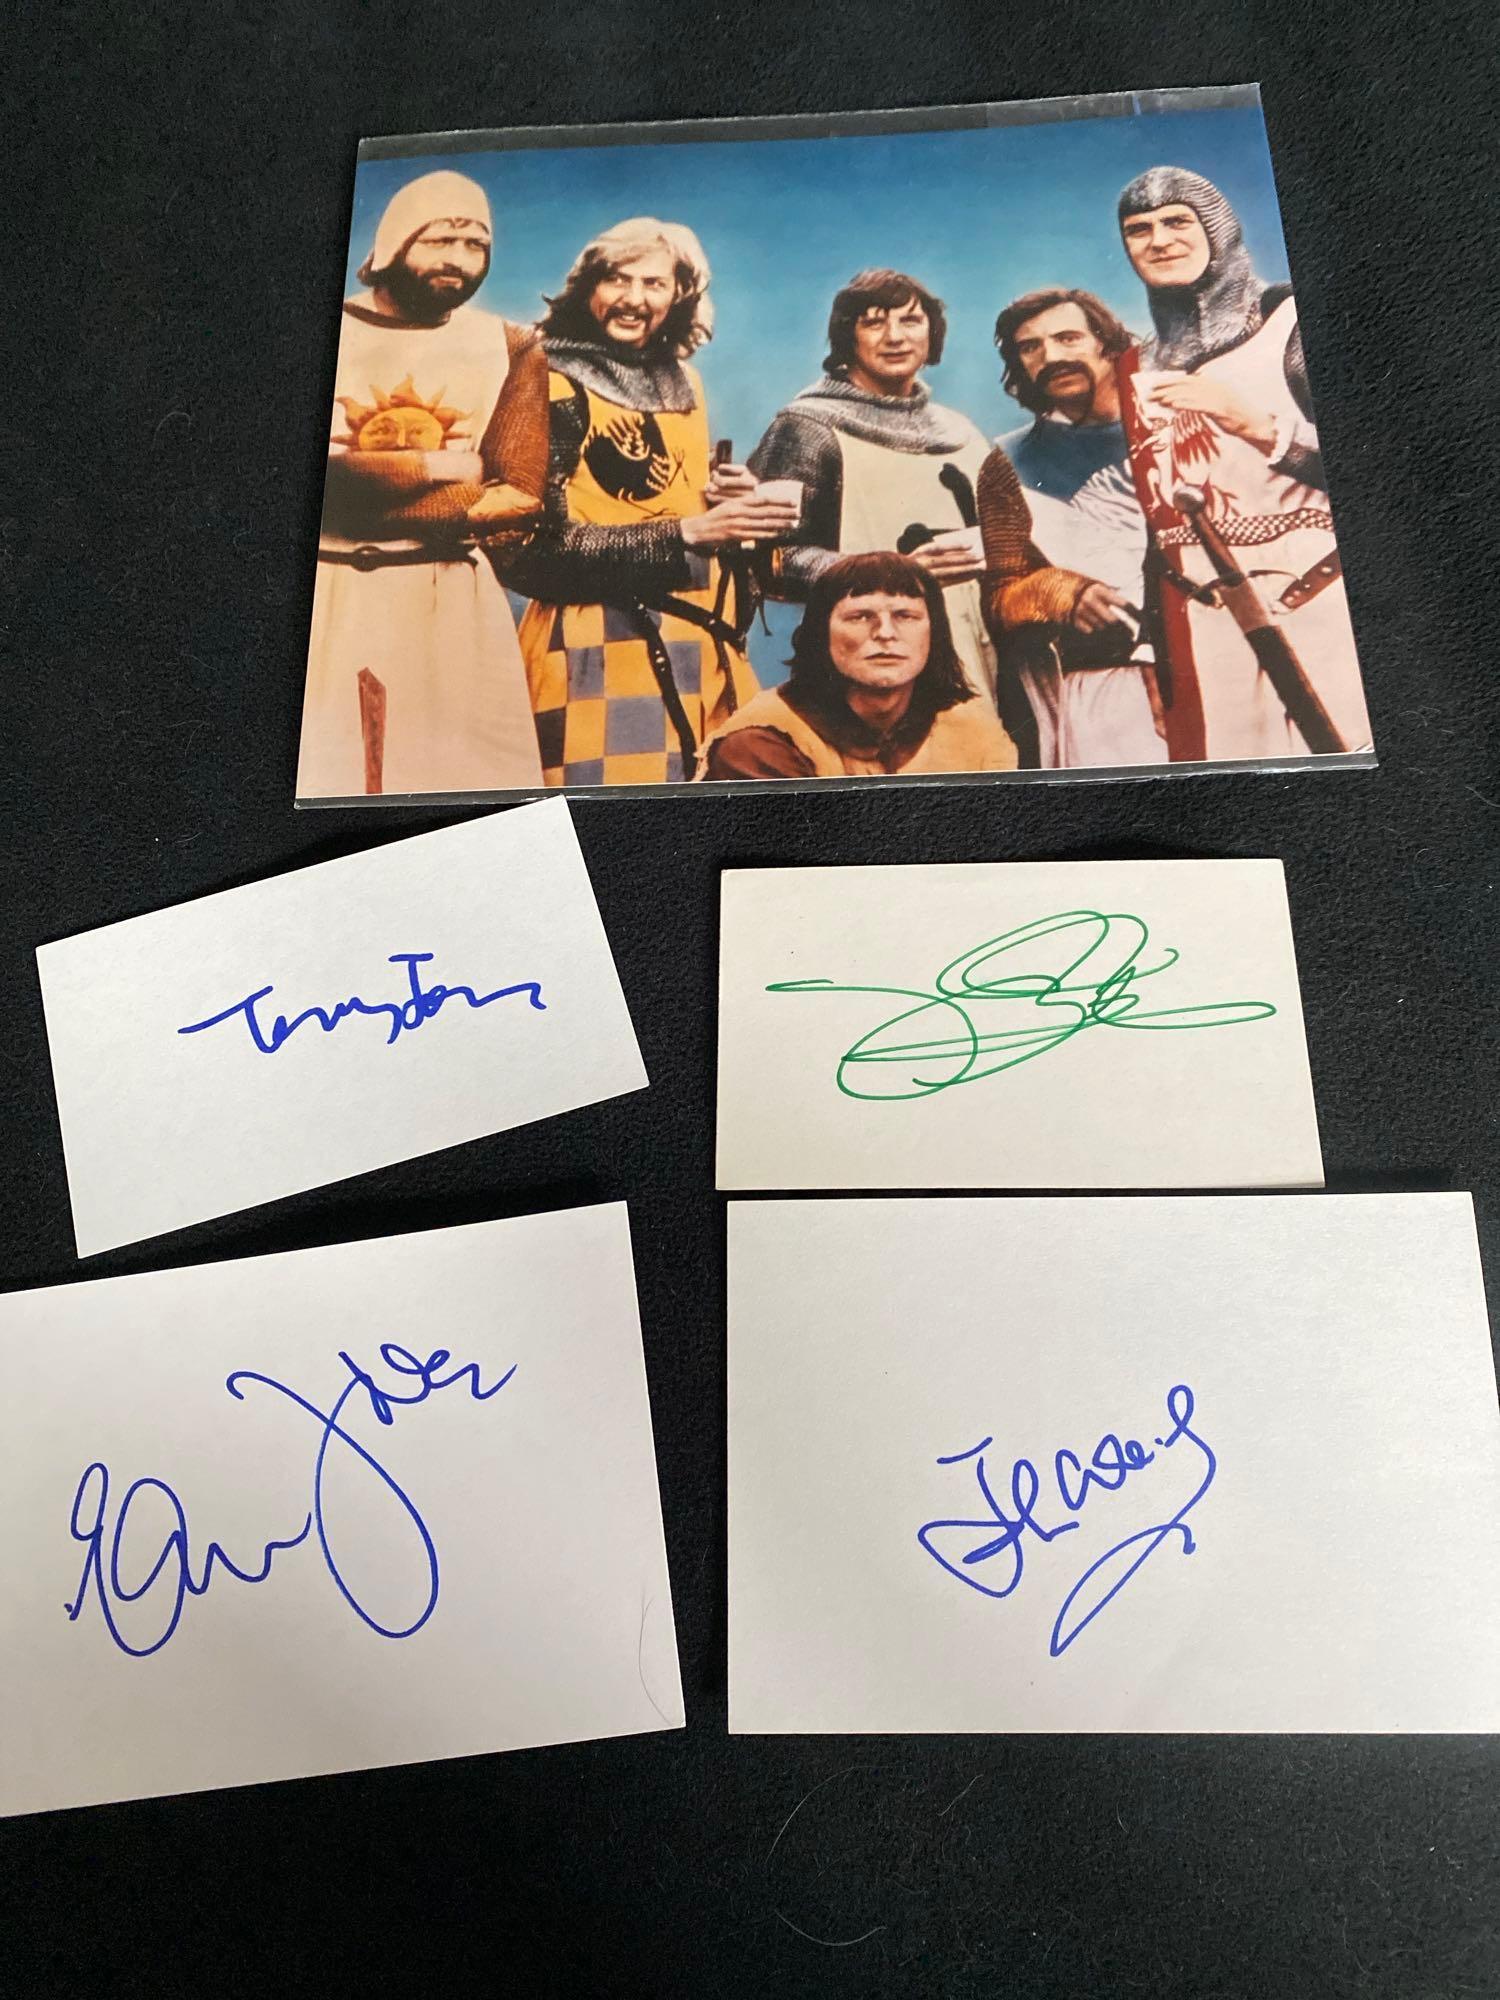 Two Celebrity Photos With Autograph Cards